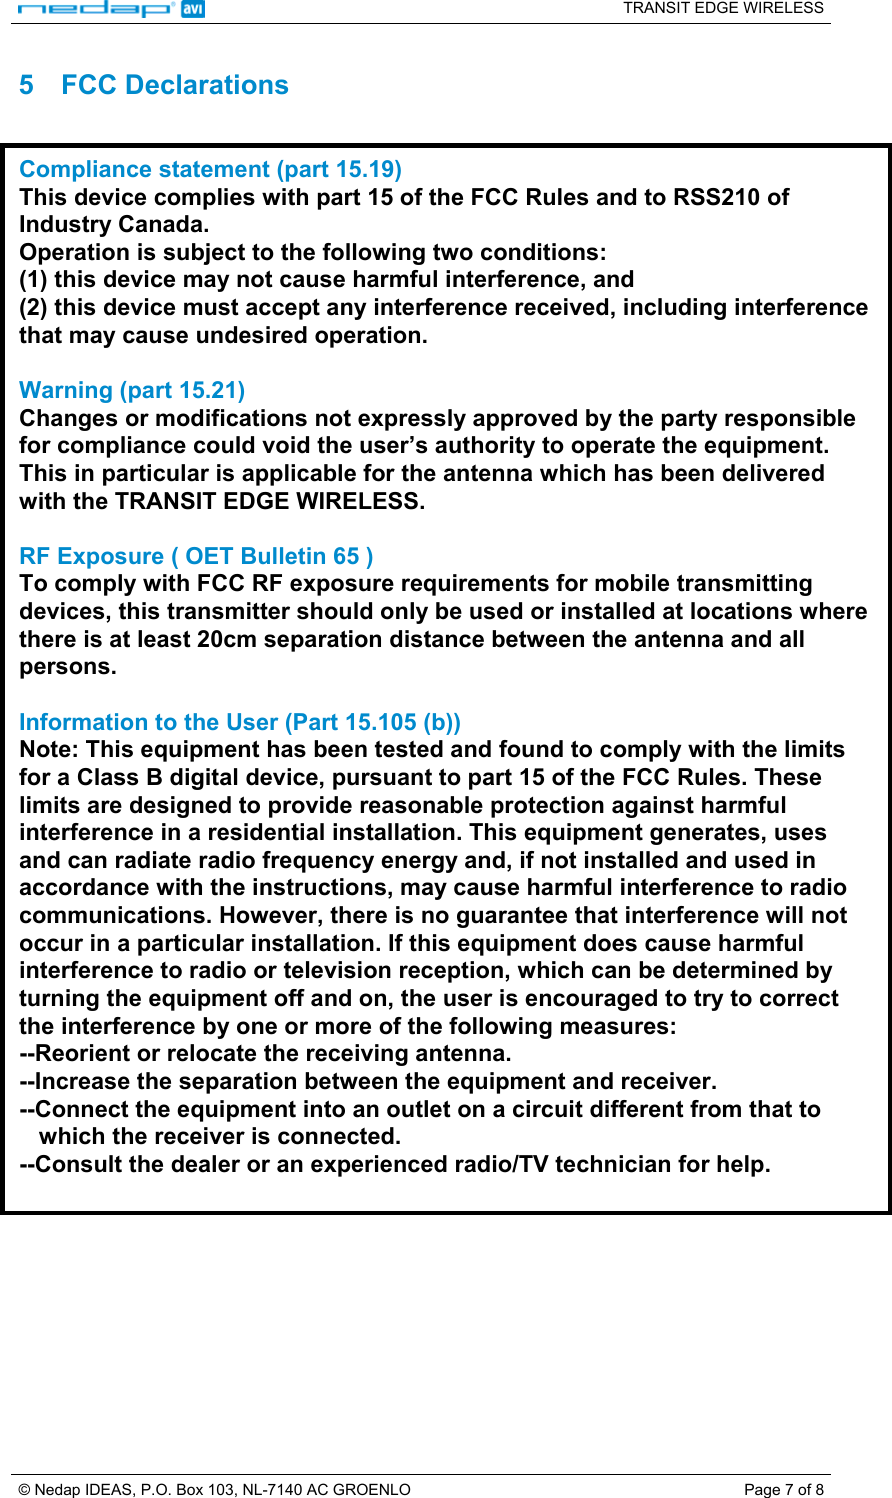   TRANSIT EDGE WIRELESS  © Nedap IDEAS, P.O. Box 103, NL-7140 AC GROENLO  Page 7 of 8 5 FCC Declarations  Compliance statement (part 15.19)  This device complies with part 15 of the FCC Rules and to RSS210 of Industry Canada. Operation is subject to the following two conditions: (1) this device may not cause harmful interference, and (2) this device must accept any interference received, including interference that may cause undesired operation.  Warning (part 15.21) Changes or modifications not expressly approved by the party responsible for compliance could void the user’s authority to operate the equipment. This in particular is applicable for the antenna which has been delivered with the TRANSIT EDGE WIRELESS.  RF Exposure ( OET Bulletin 65 ) To comply with FCC RF exposure requirements for mobile transmitting devices, this transmitter should only be used or installed at locations where there is at least 20cm separation distance between the antenna and all persons.  Information to the User (Part 15.105 (b)) Note: This equipment has been tested and found to comply with the limits for a Class B digital device, pursuant to part 15 of the FCC Rules. These limits are designed to provide reasonable protection against harmful interference in a residential installation. This equipment generates, uses and can radiate radio frequency energy and, if not installed and used in accordance with the instructions, may cause harmful interference to radio communications. However, there is no guarantee that interference will not occur in a particular installation. If this equipment does cause harmful interference to radio or television reception, which can be determined by turning the equipment off and on, the user is encouraged to try to correct the interference by one or more of the following measures: --Reorient or relocate the receiving antenna. --Increase the separation between the equipment and receiver. --Connect the equipment into an outlet on a circuit different from that to     which the receiver is connected. --Consult the dealer or an experienced radio/TV technician for help.  